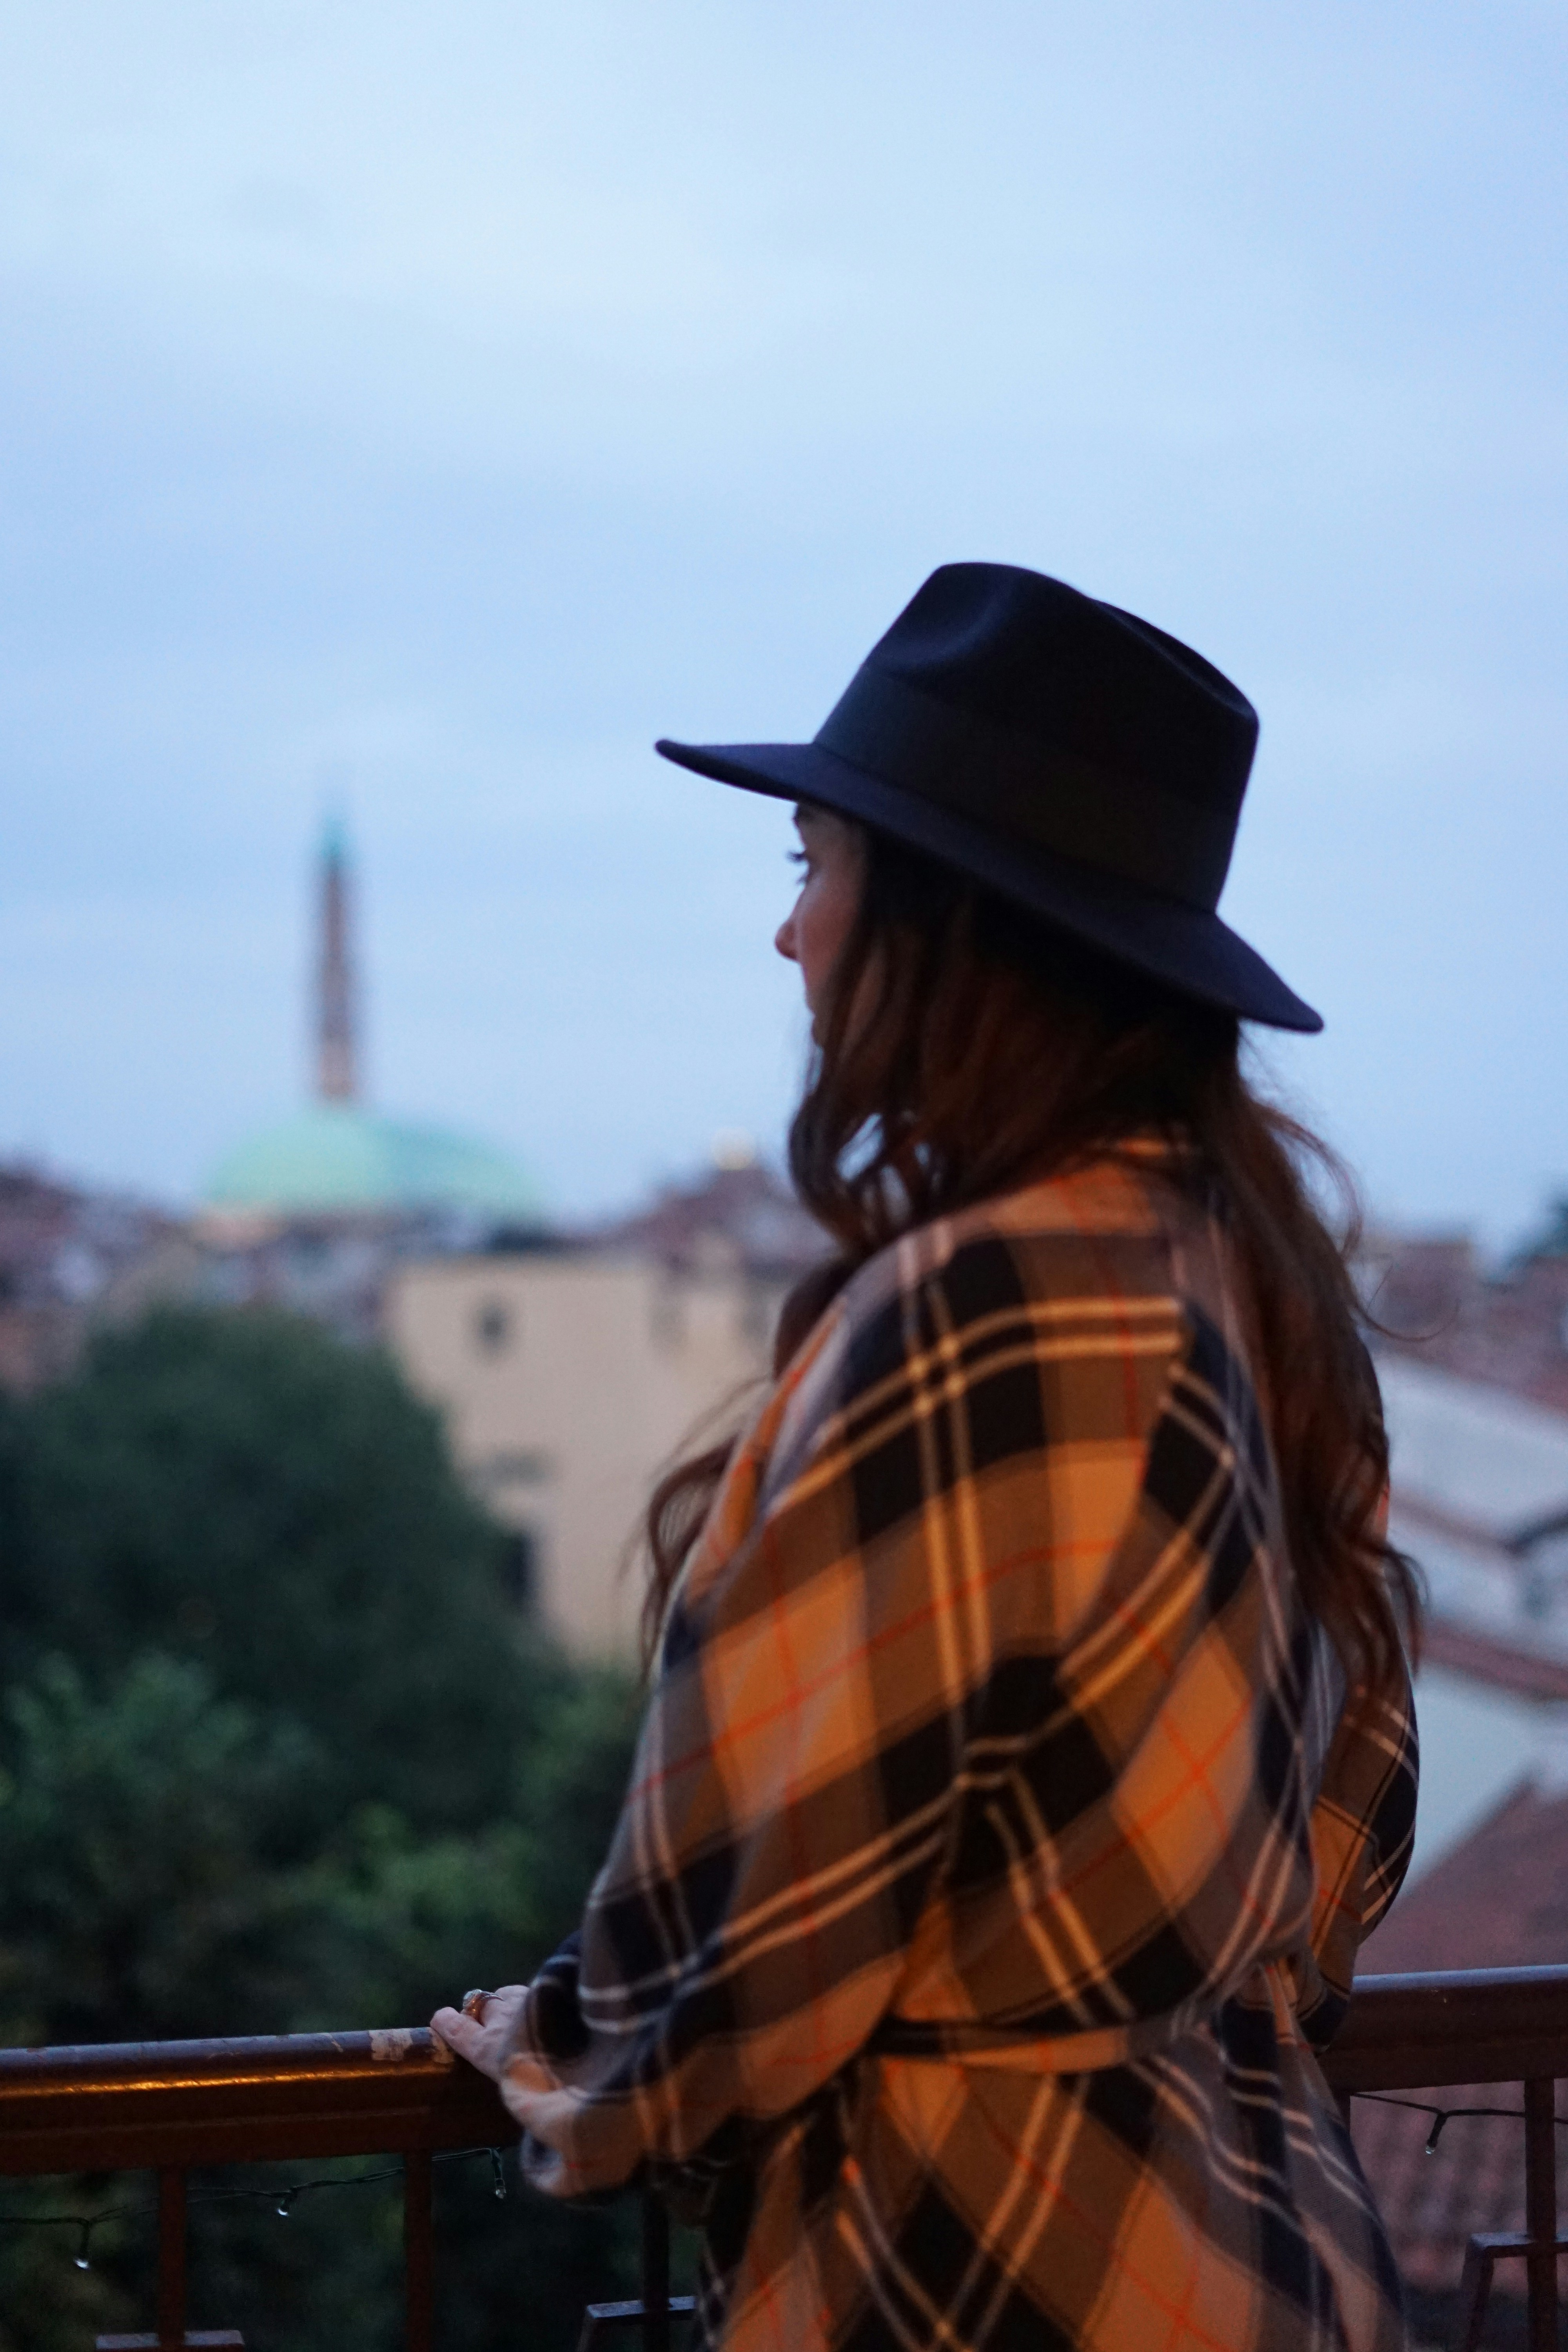 A woman with a hat admiring the view of the city.